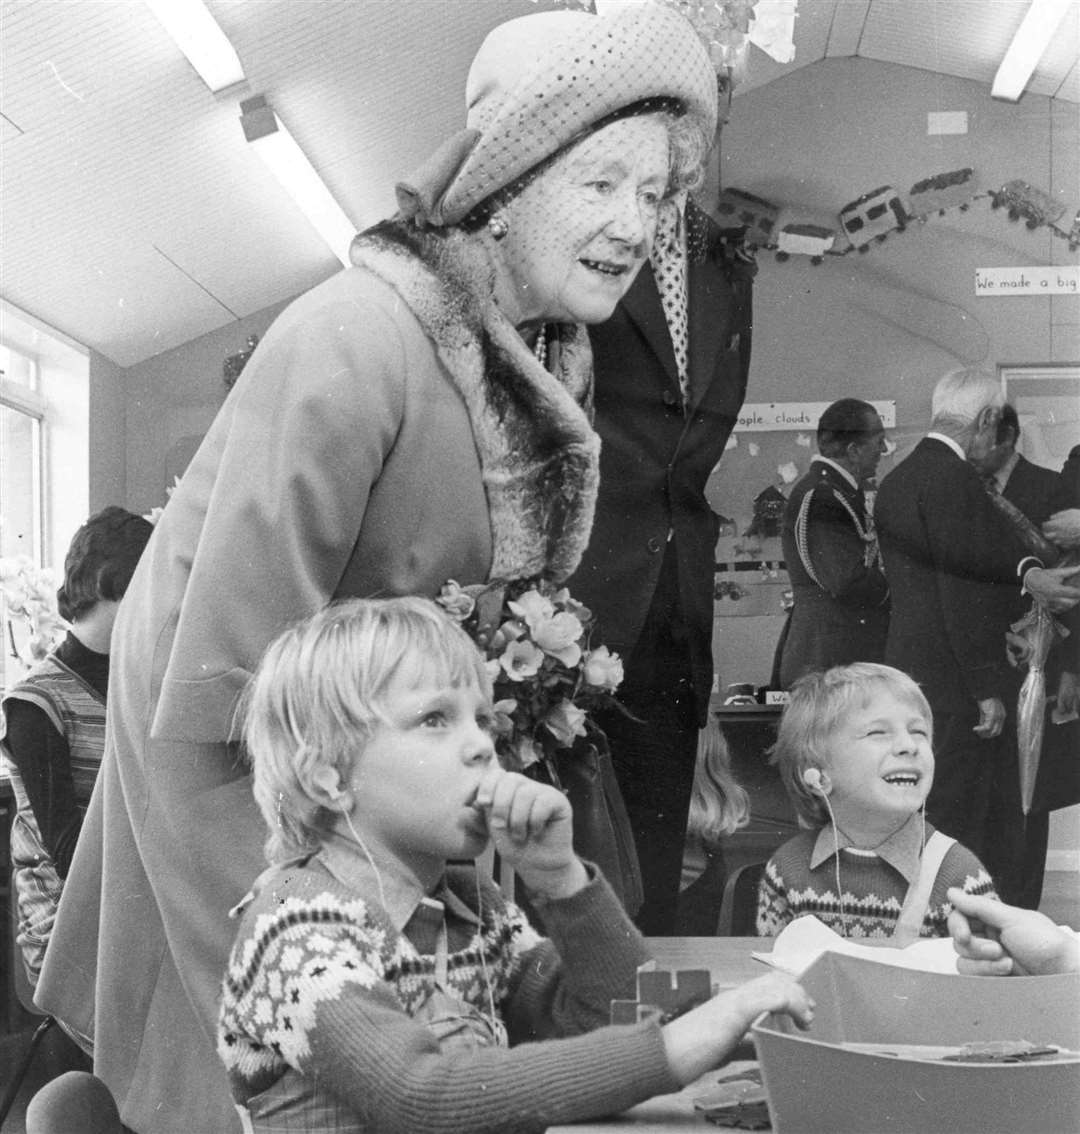 The Queen Mother visited the Royal School for the Deaf at Margate to open its £1 million new buildings in April 1976